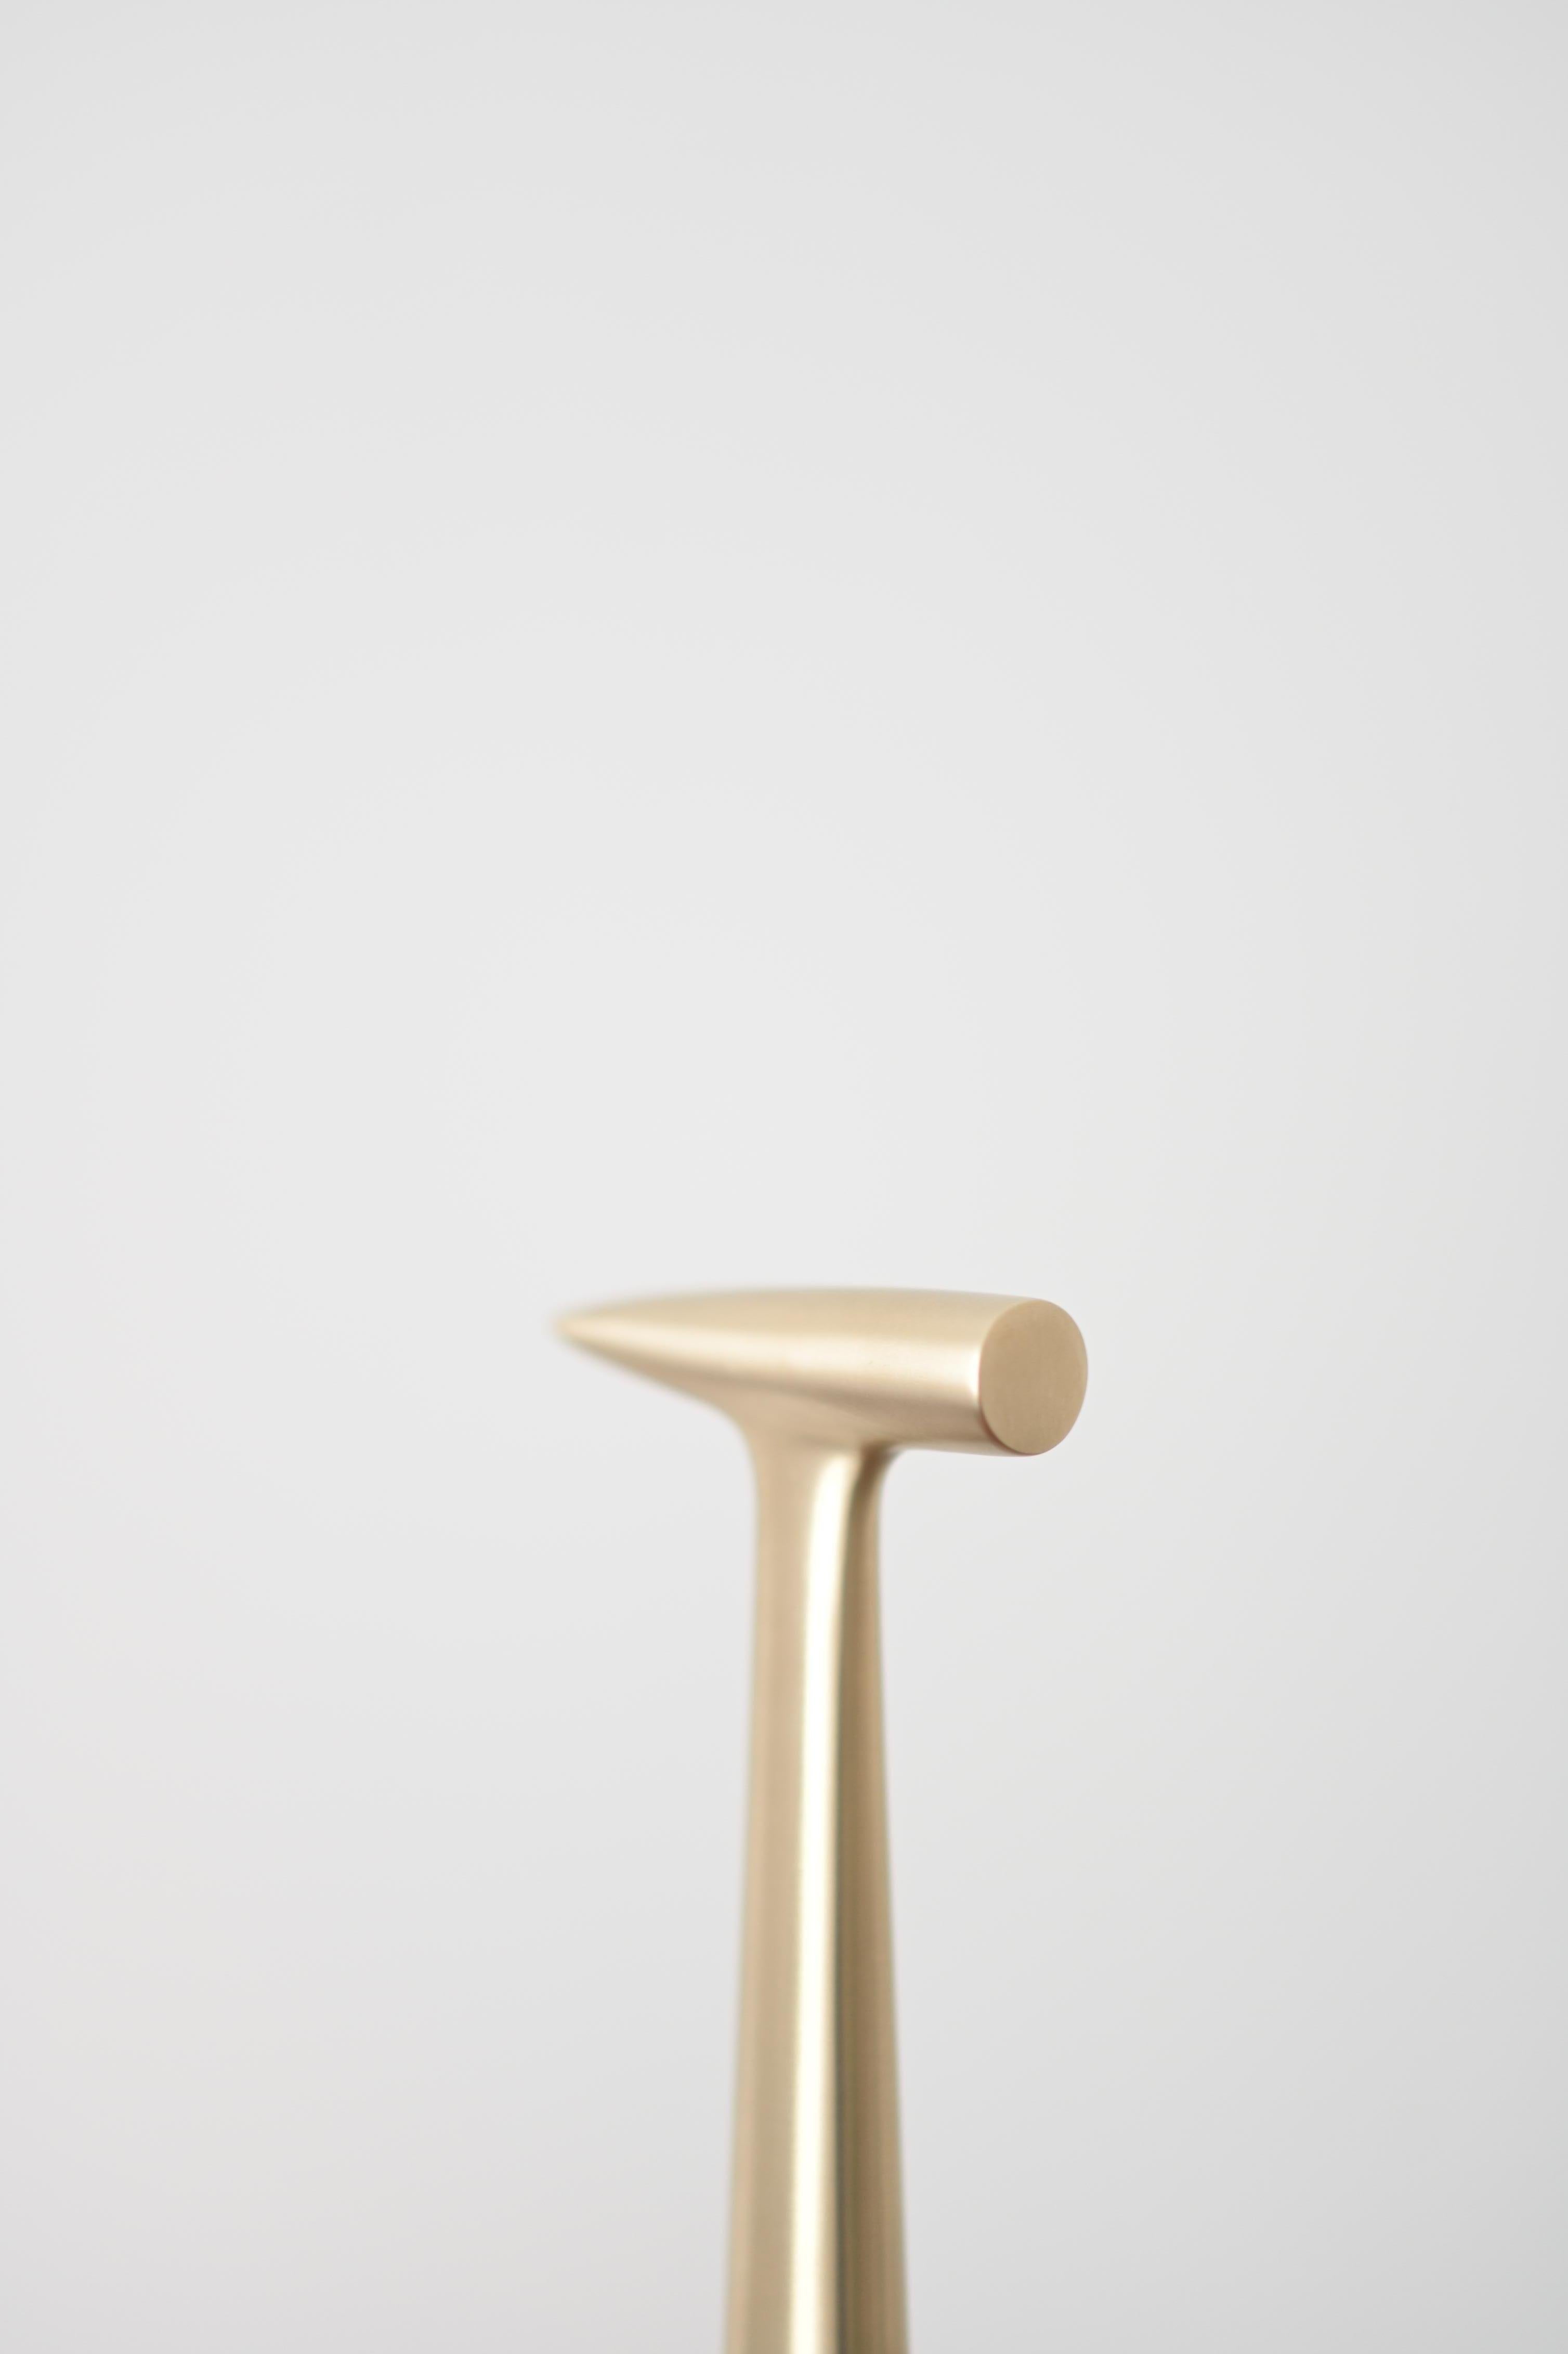 Organic Modern Cast Hammer in Satin Brass Handcrafted in Portugal by Origin Made For Sale